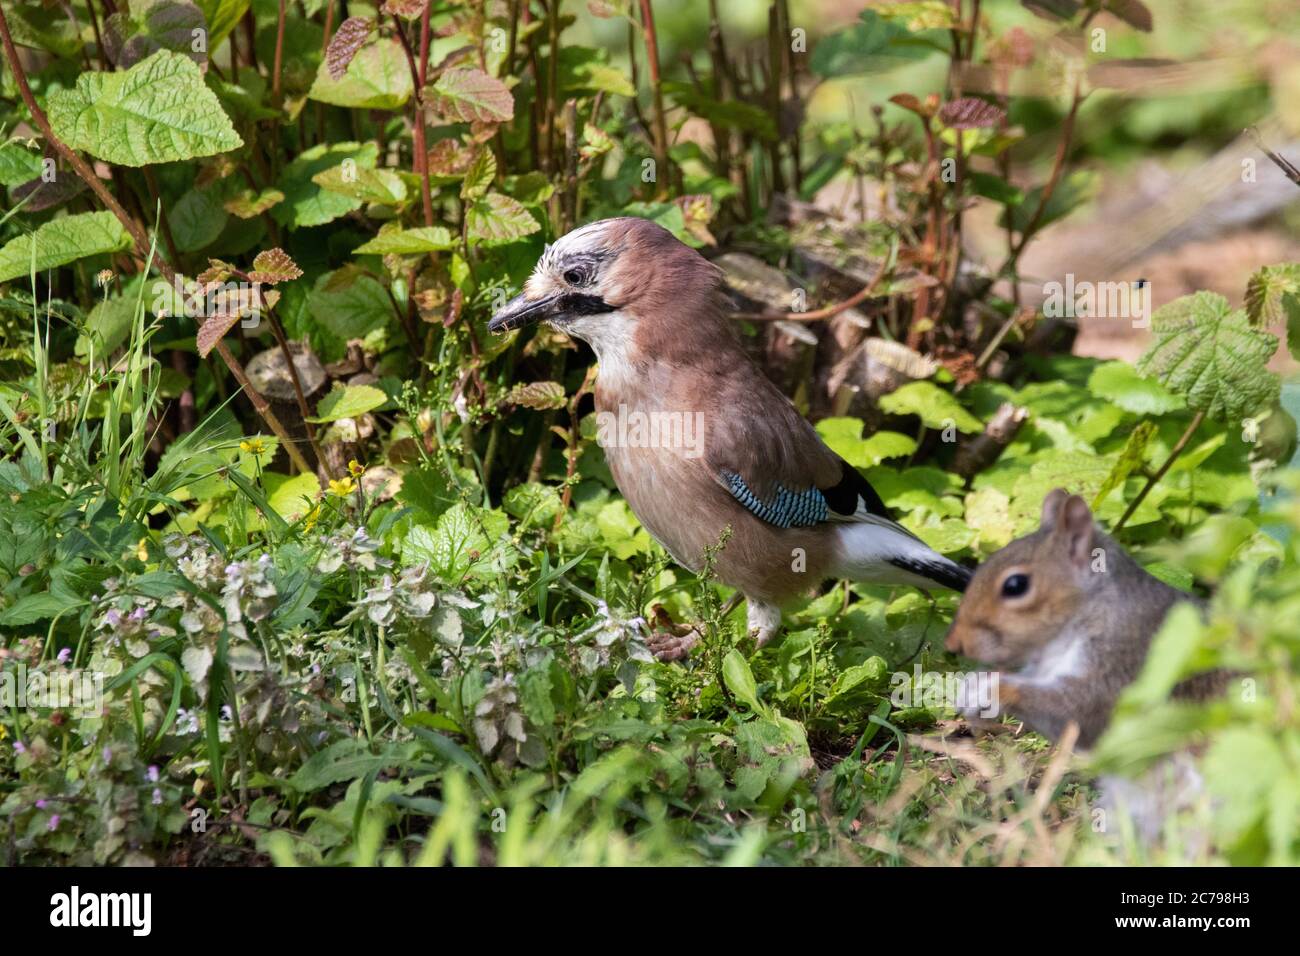 Jay searching for food on forest floor. Stock Photo